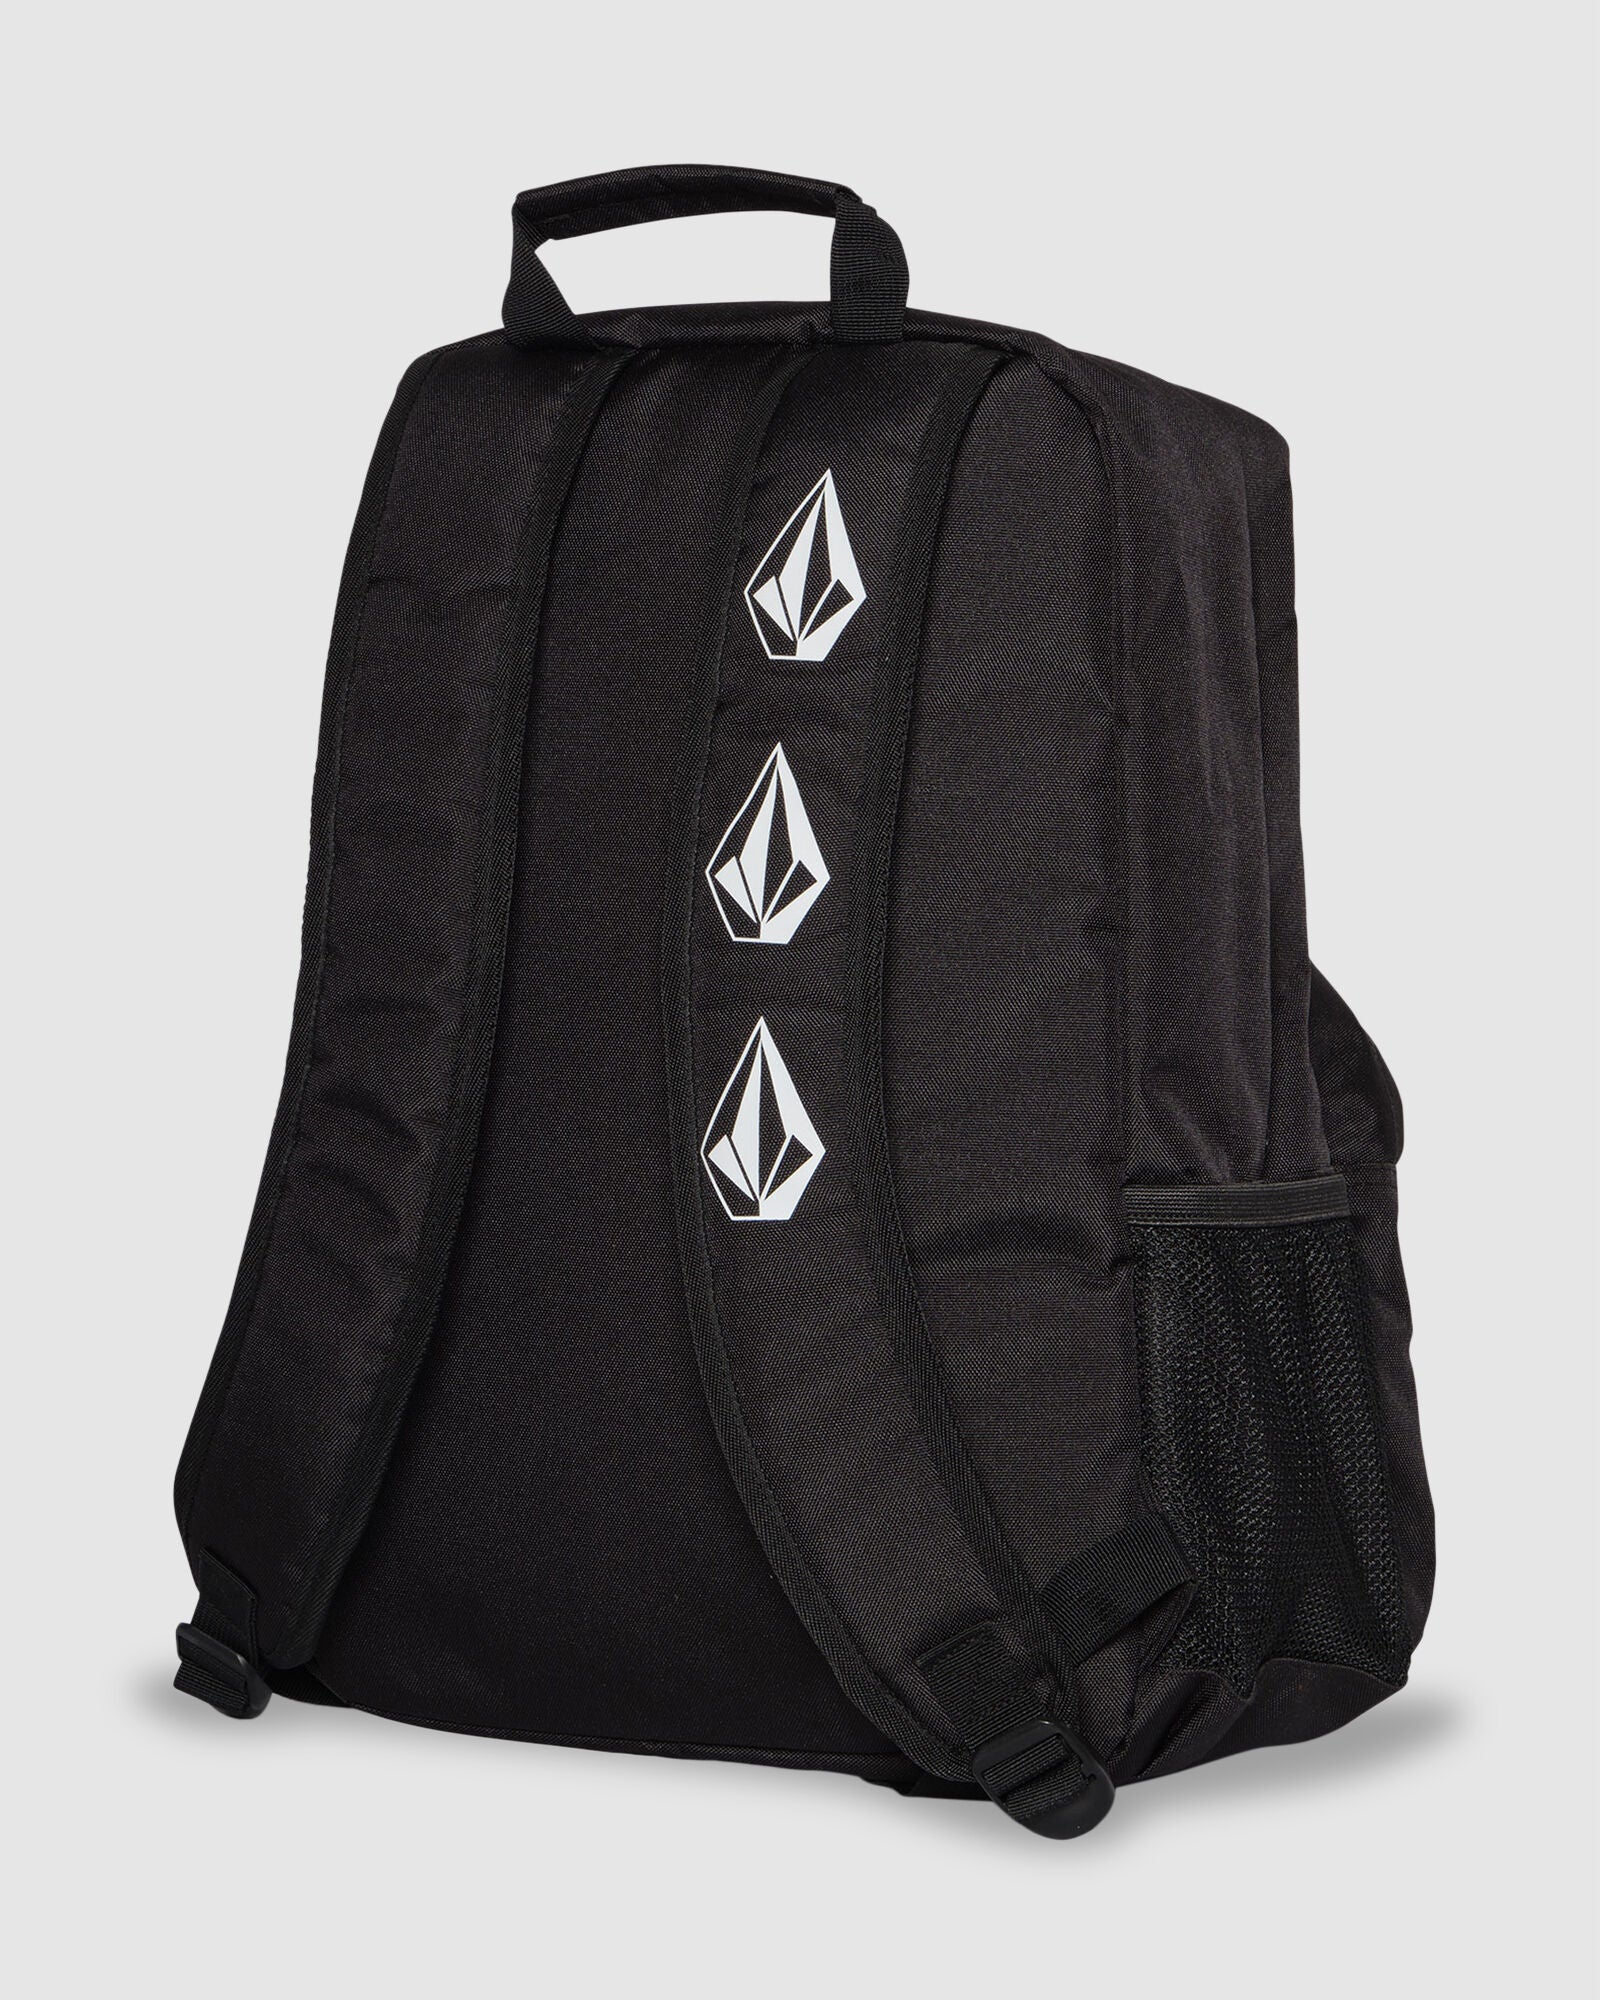 ICONIC STONES BACK PACK BLACK VOLCOM MENS BACK TO SCHOOL ACCESSORIES